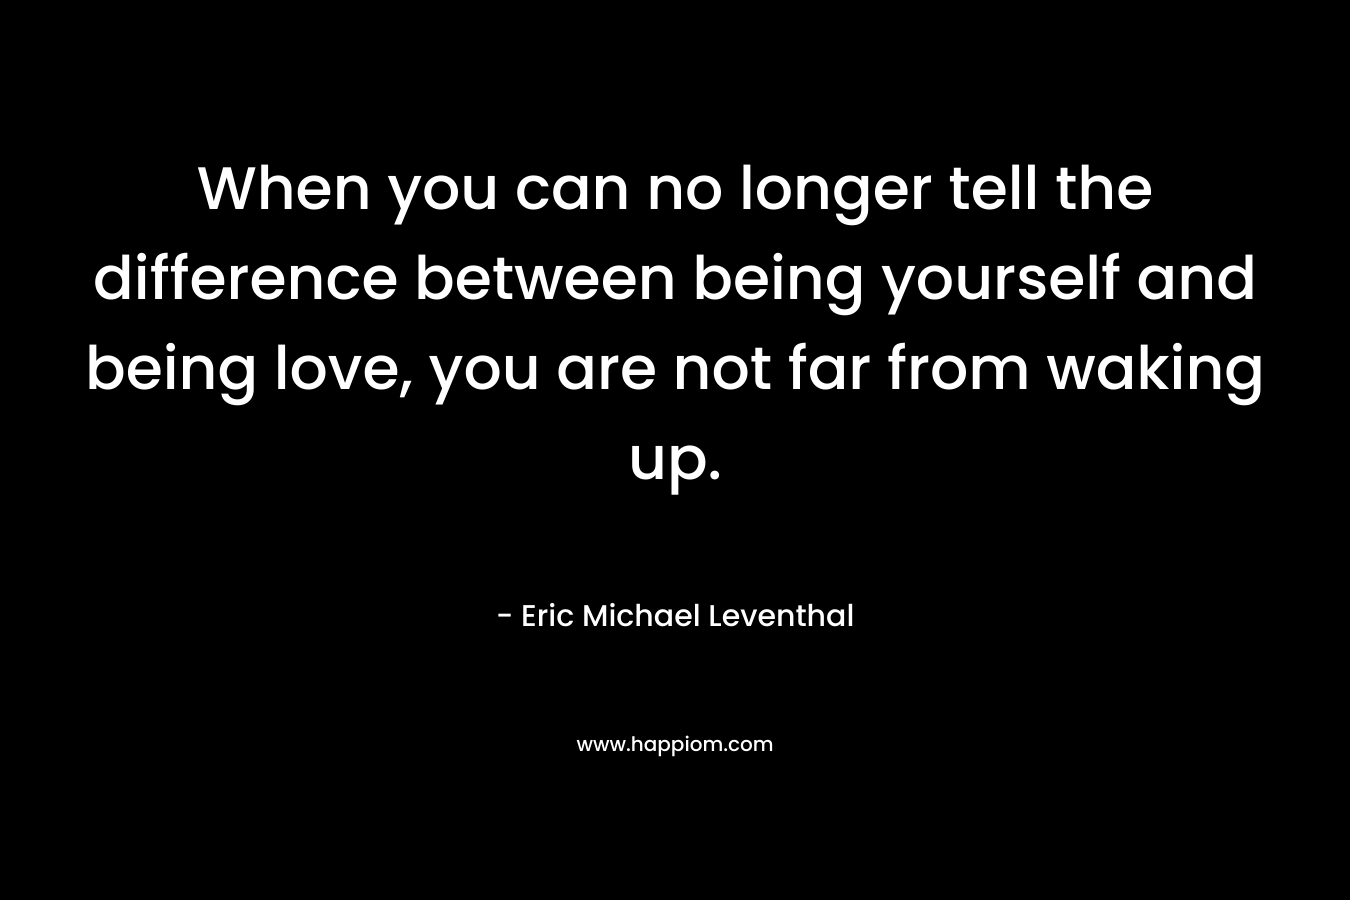 When you can no longer tell the difference between being yourself and being love, you are not far from waking up.